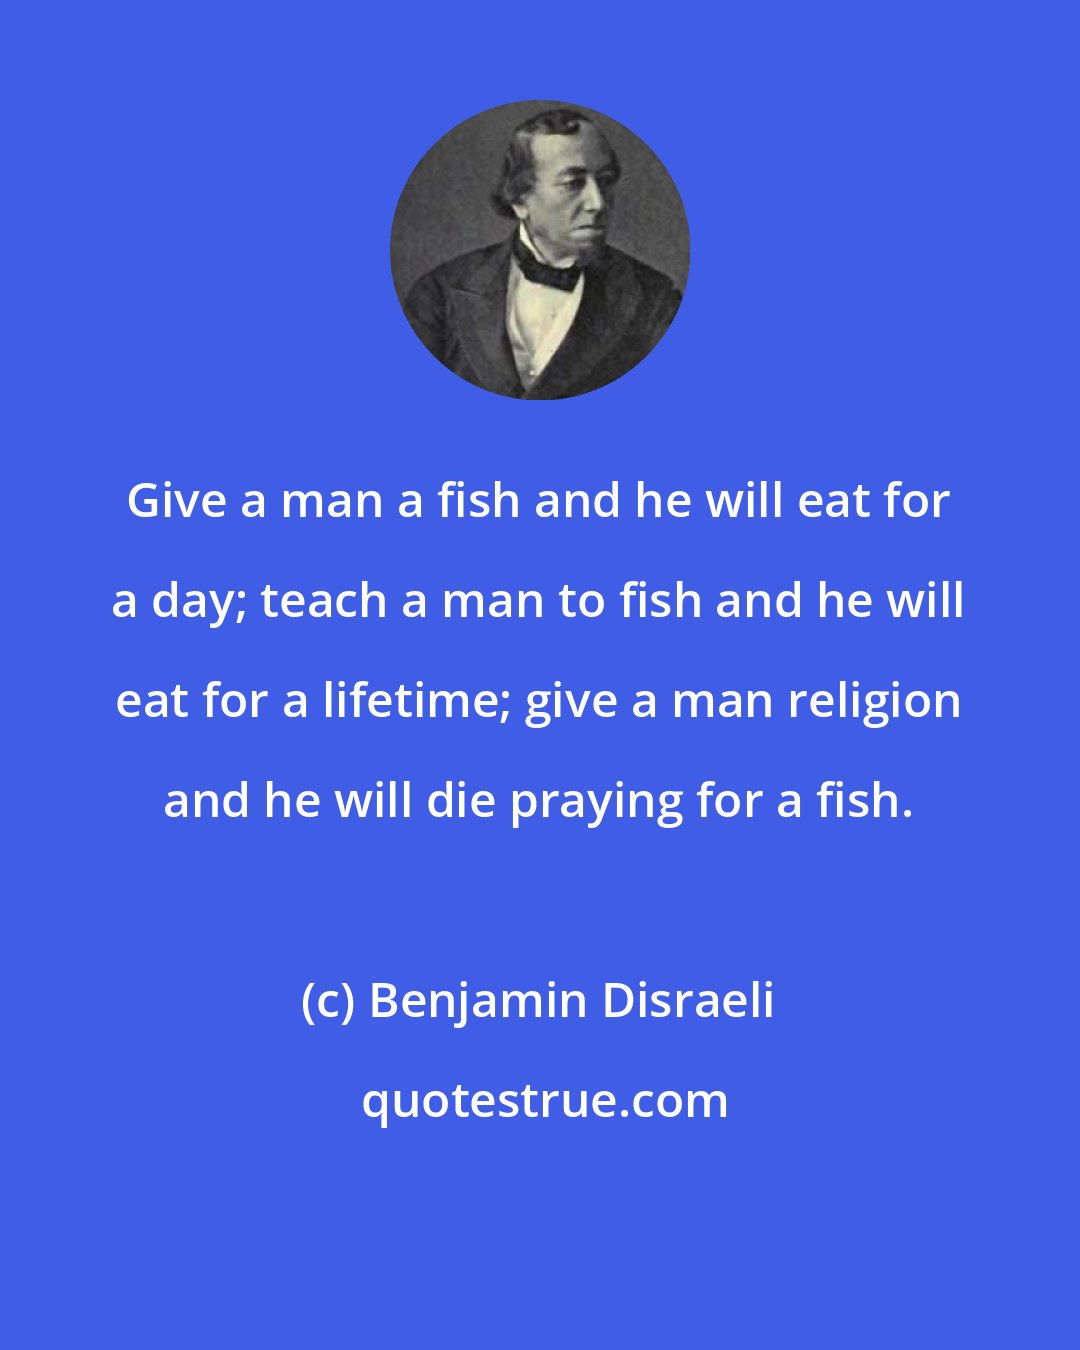 Benjamin Disraeli: Give a man a fish and he will eat for a day; teach a man to fish and he will eat for a lifetime; give a man religion and he will die praying for a fish.